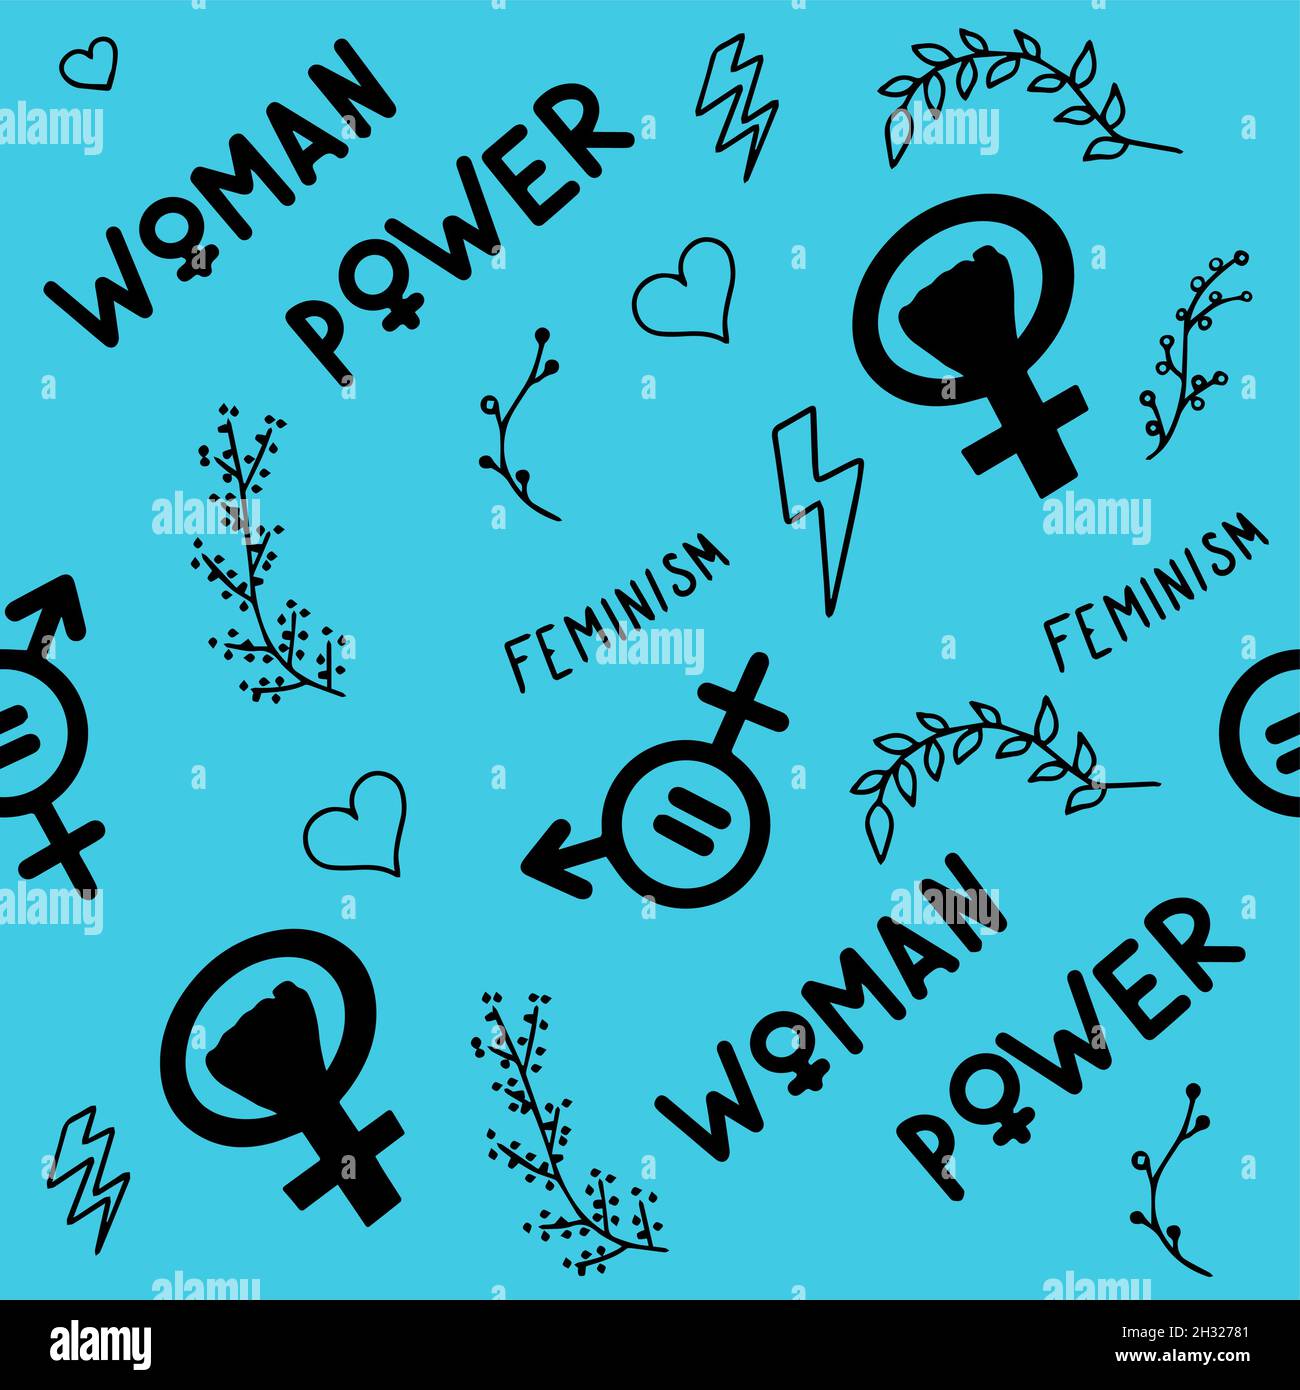 Seamless Pattern Doodle Signs Of Feminism Women S Rights Grunge Hand